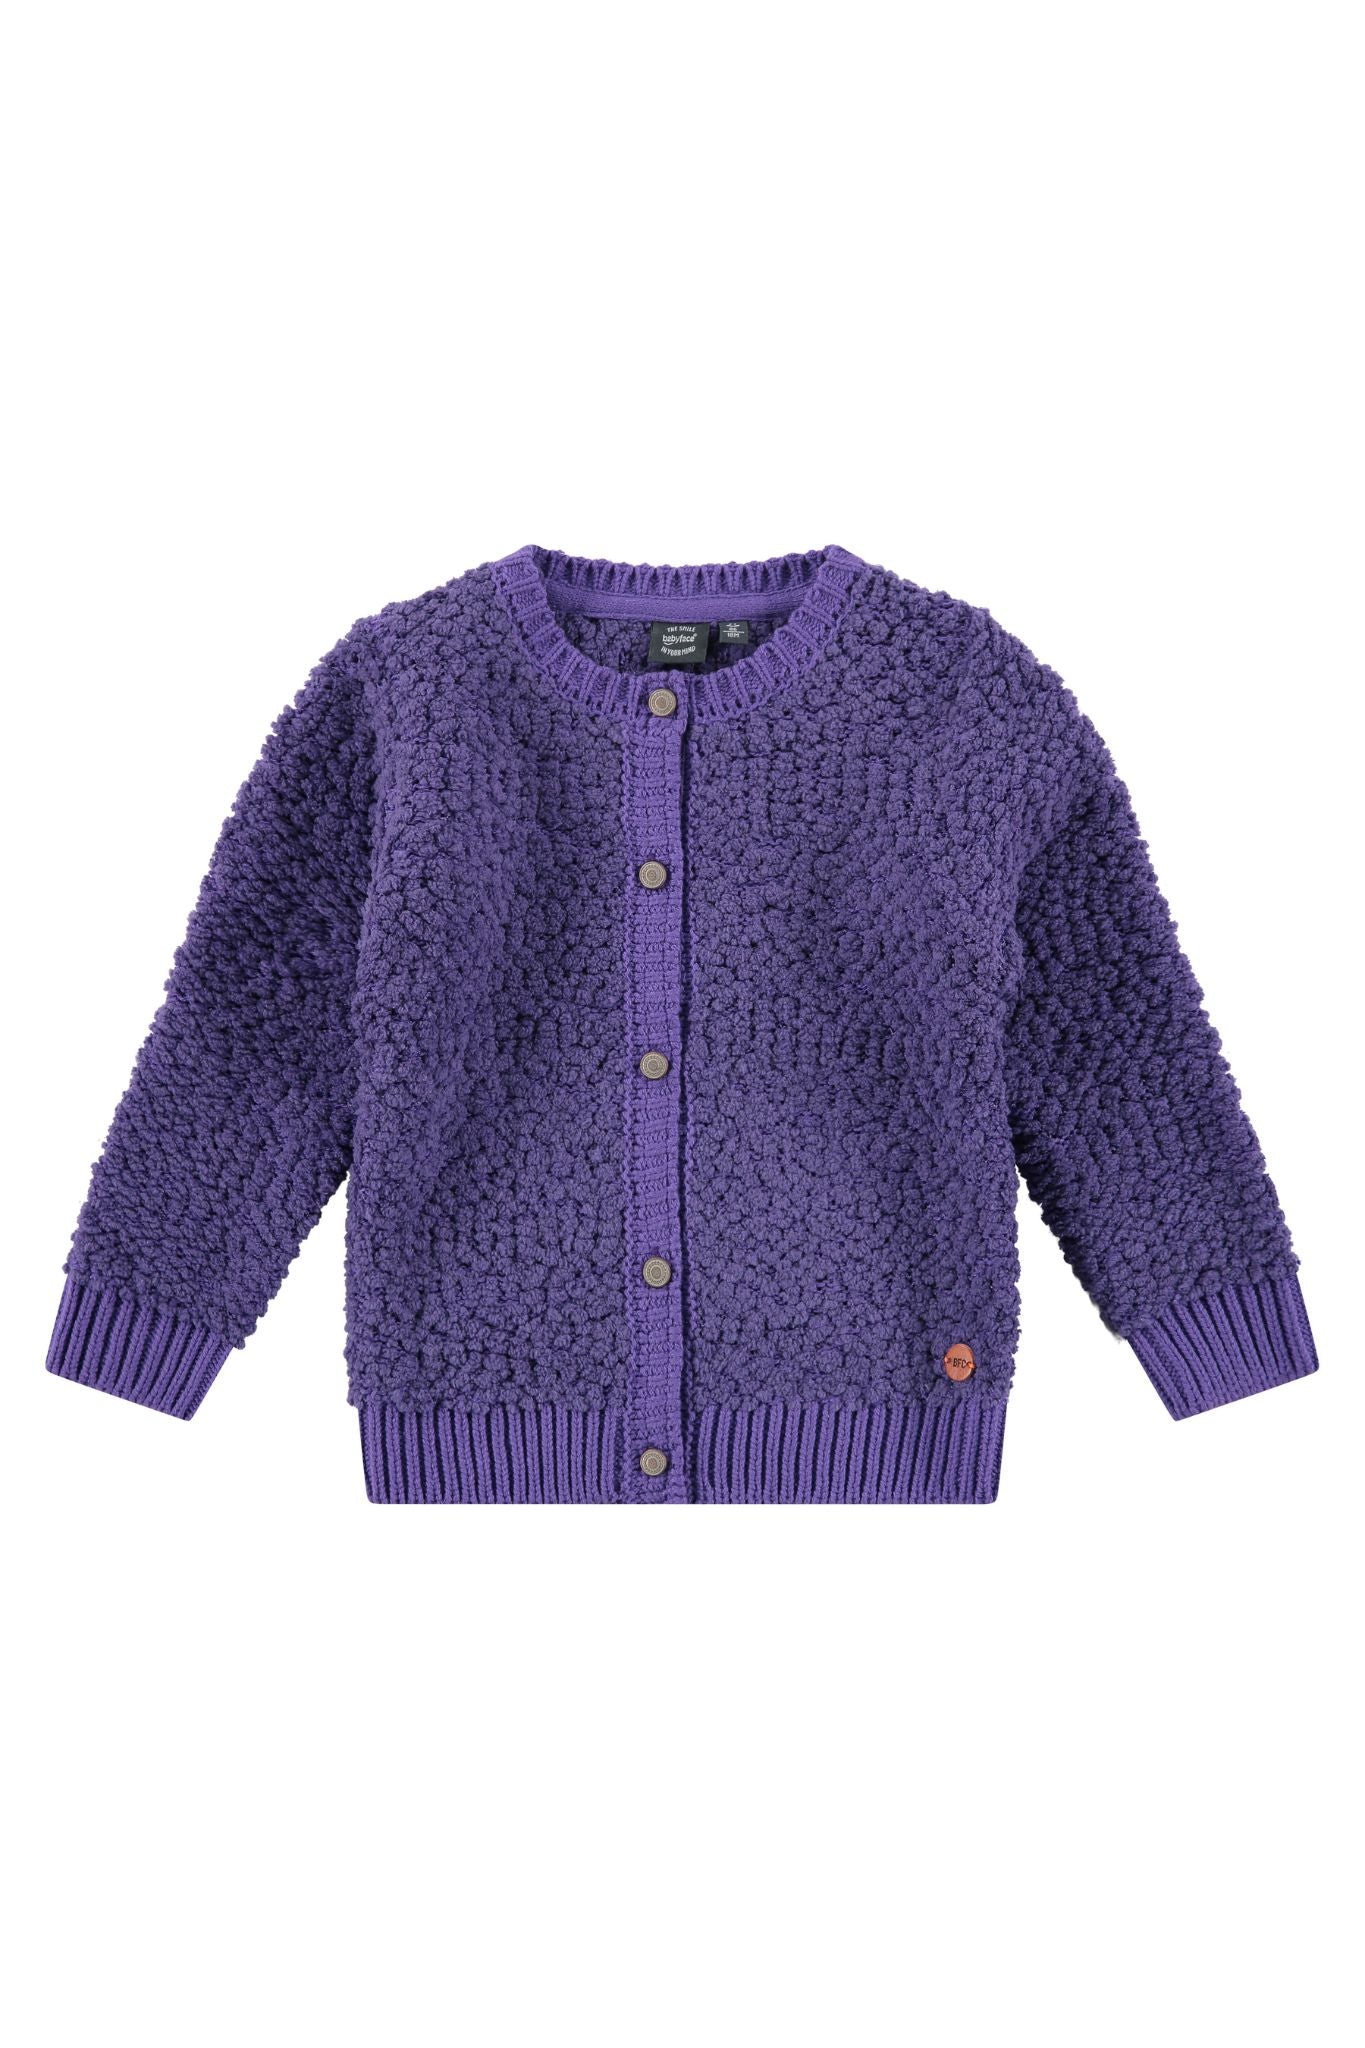 Baby Face Purple Button Up Cardigan